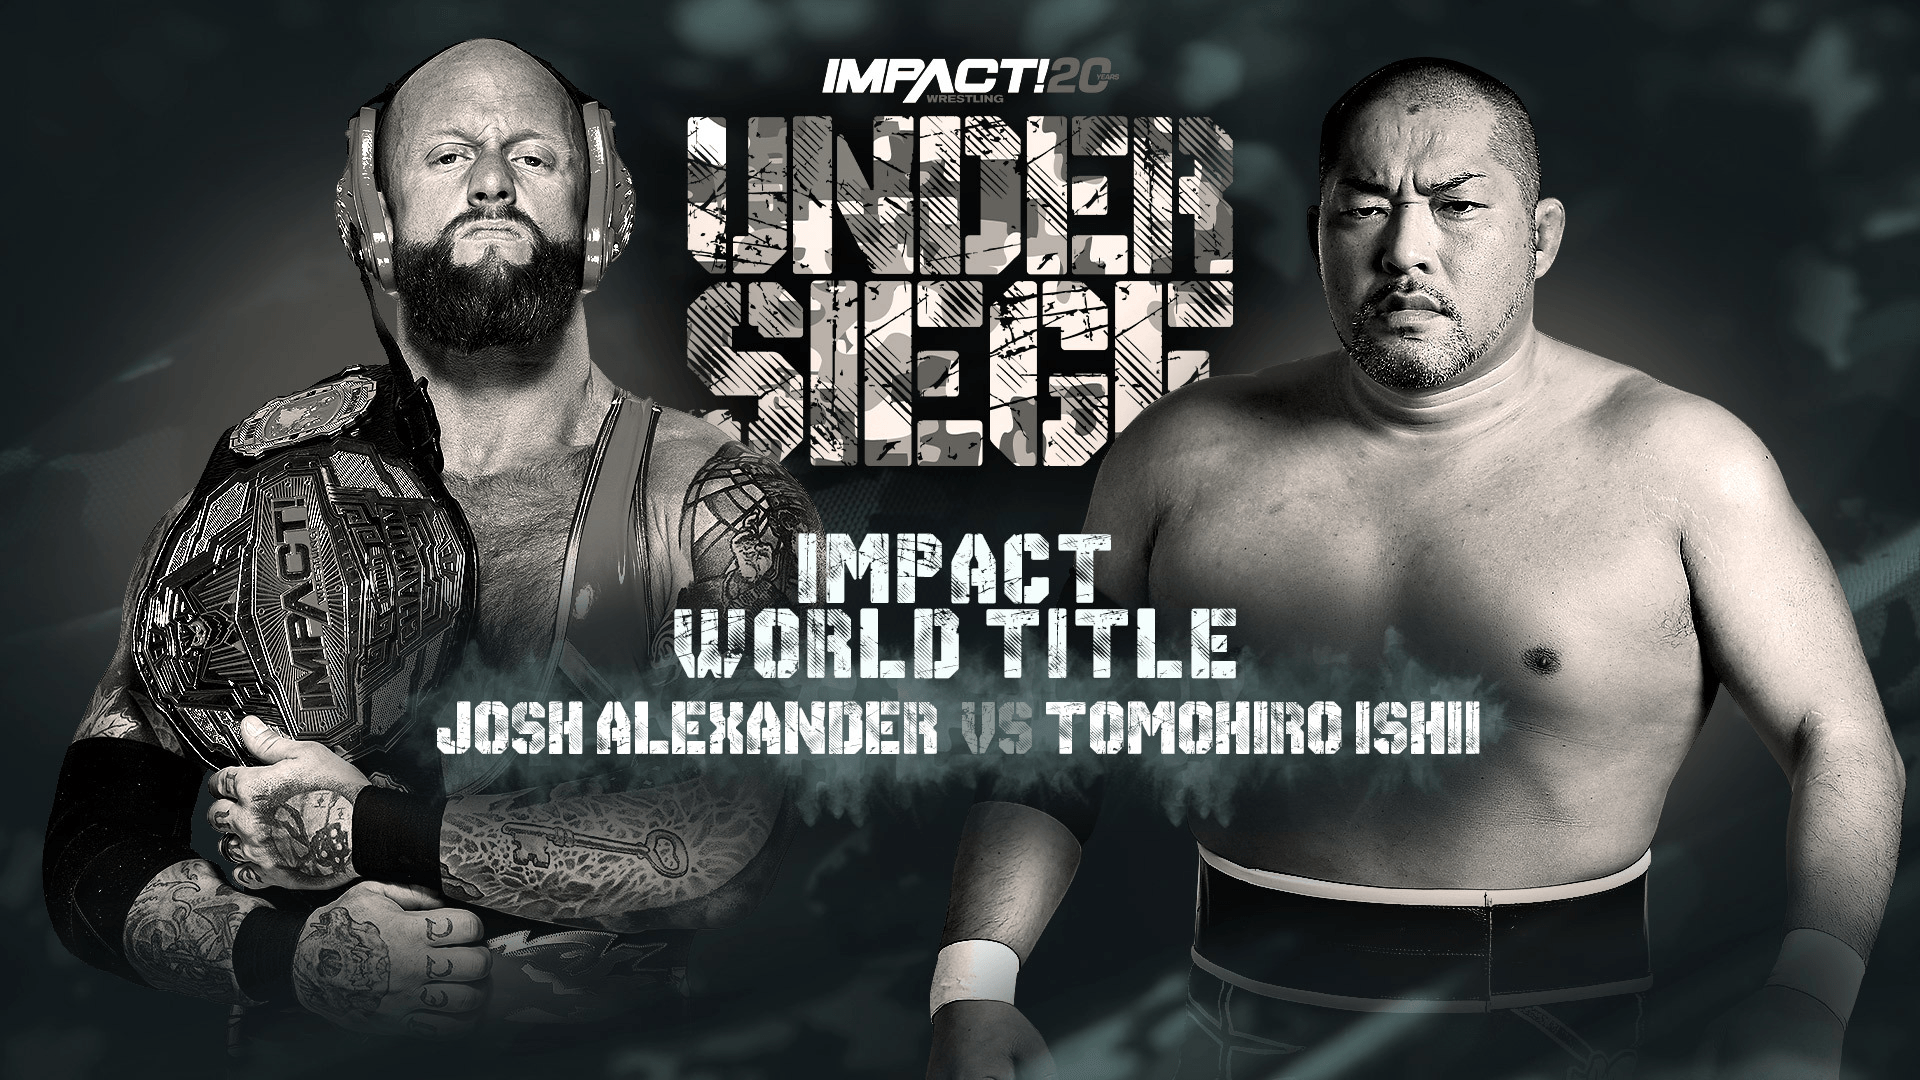 IMPACT Against All Odds Card (6/12/21) - Moose vs Kenny Omega